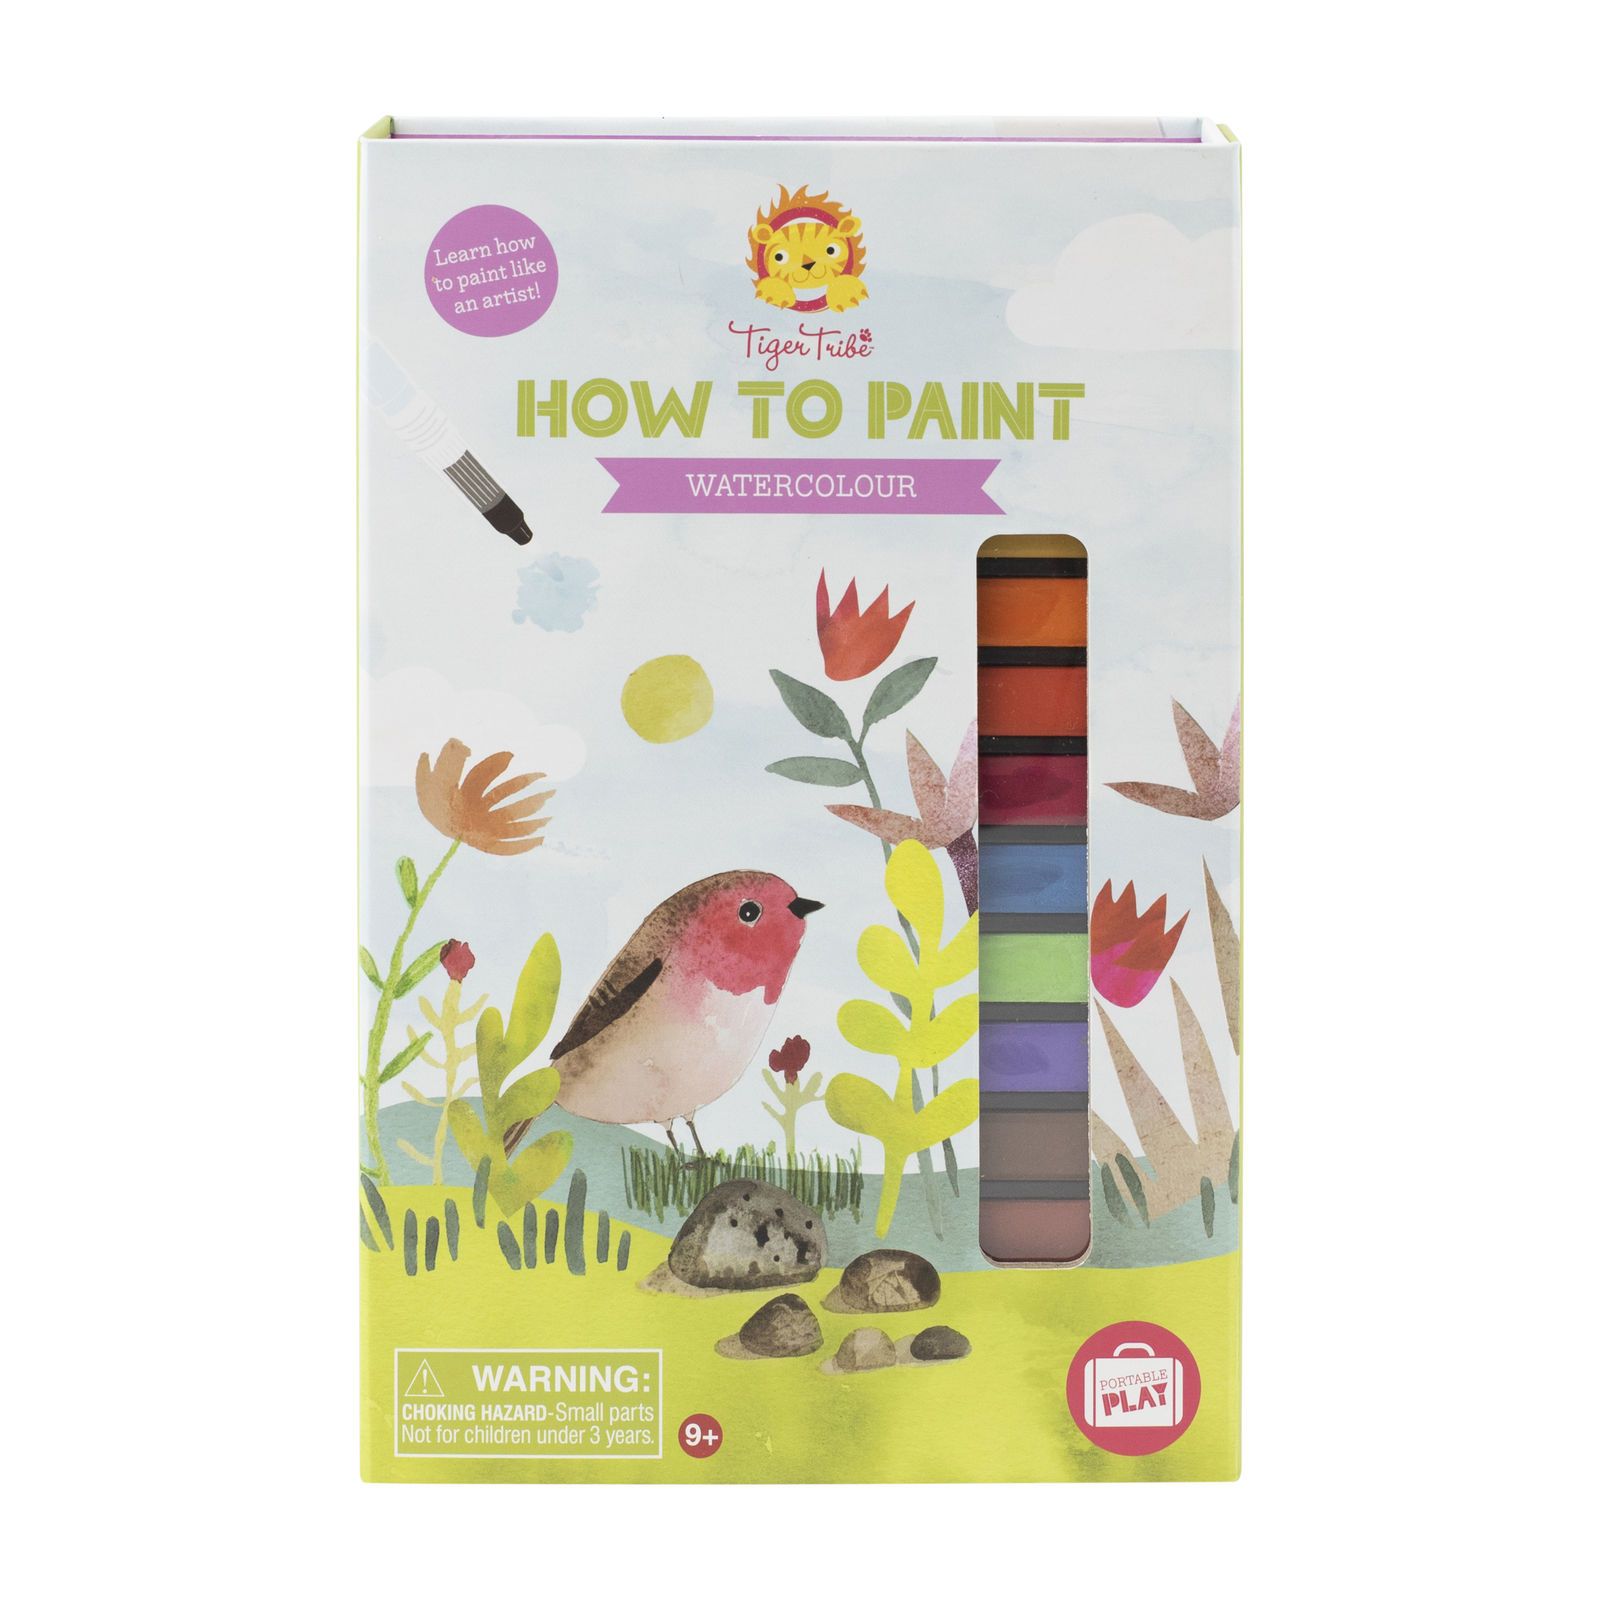 How to Paint (Watercolour)